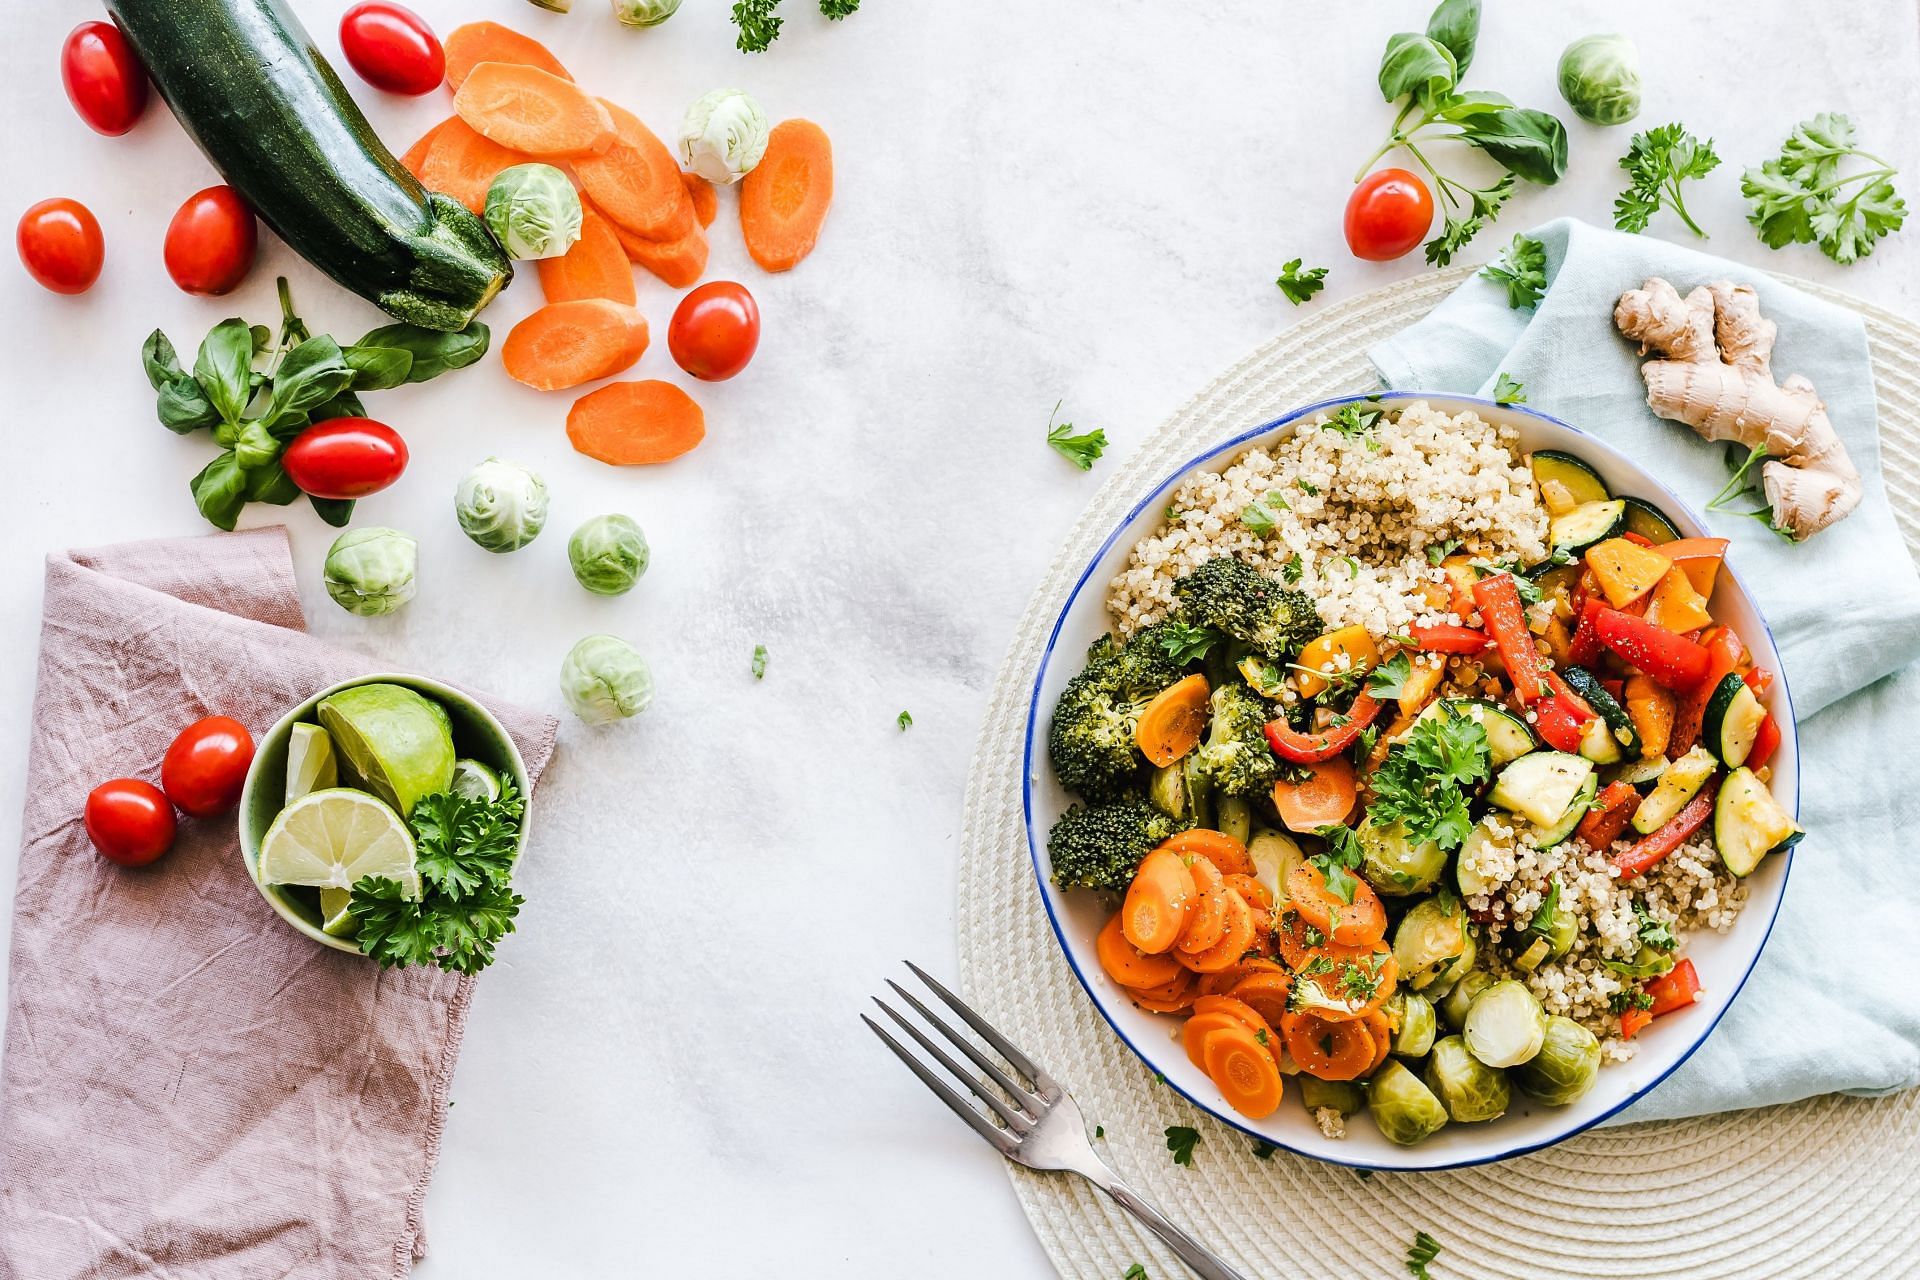 What you eat can have a big impact on your brain health. (Photo via Pexels/Ella Olsson)